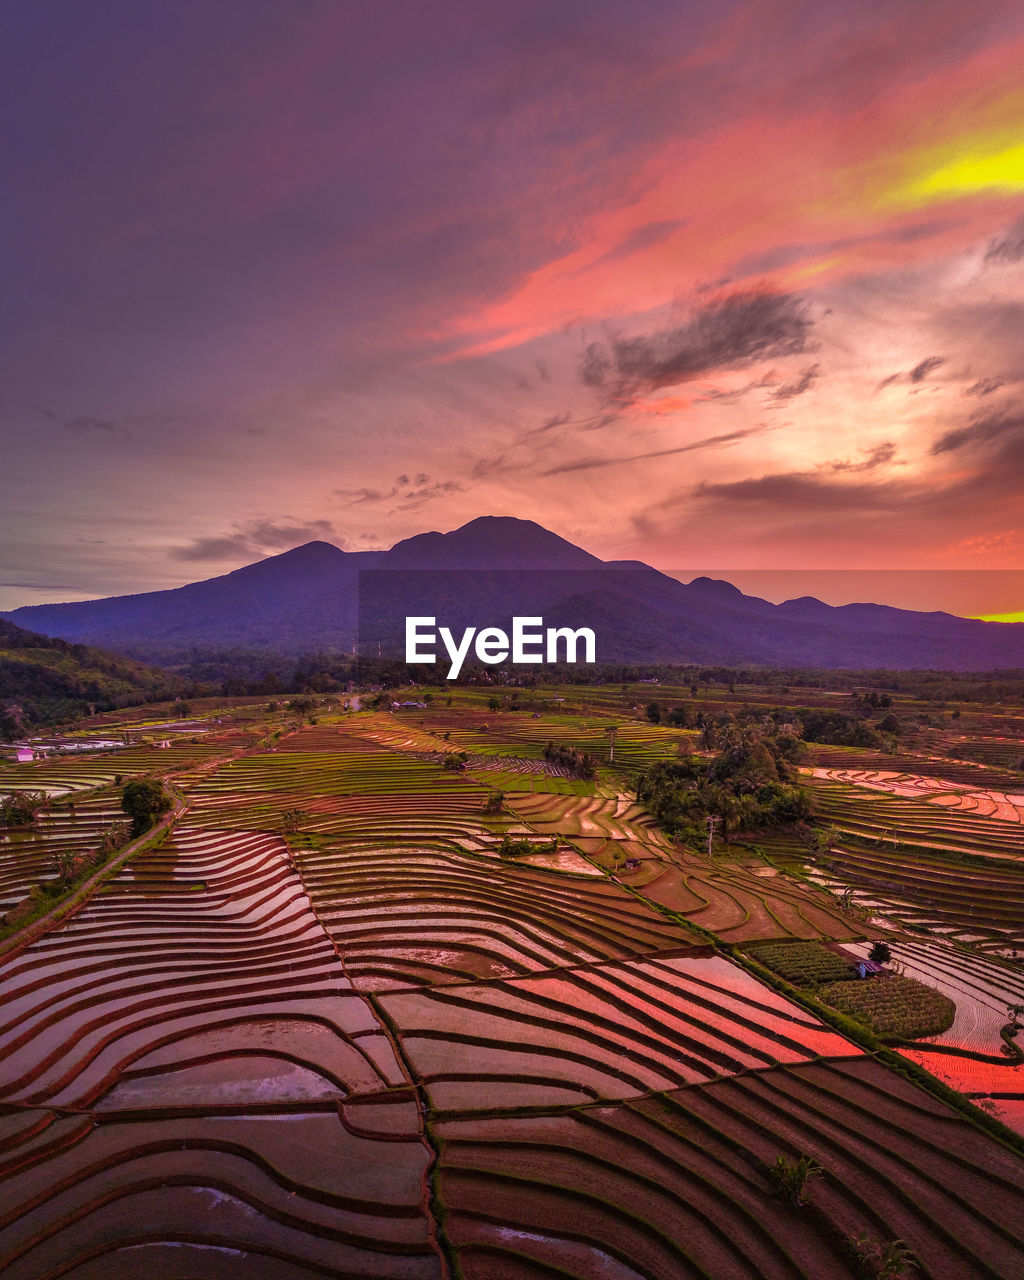 View of indonesia in the morning, rice terraces and bright sun from an aerial photo